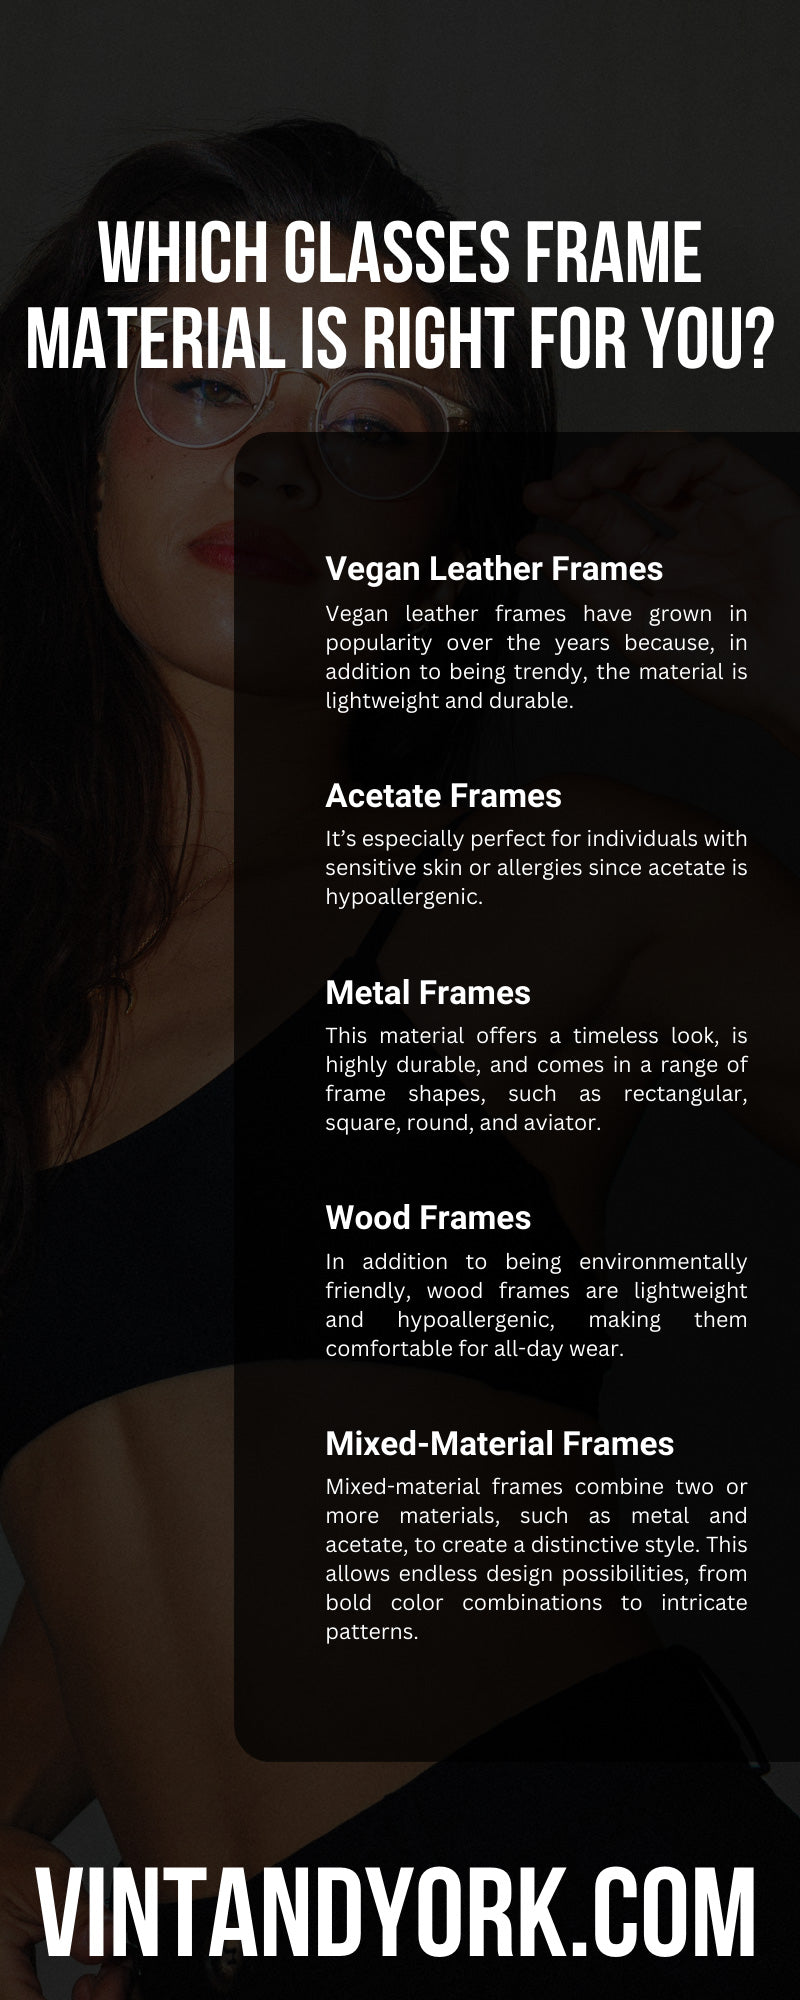 Which Glasses Frame Material Is Right for You?